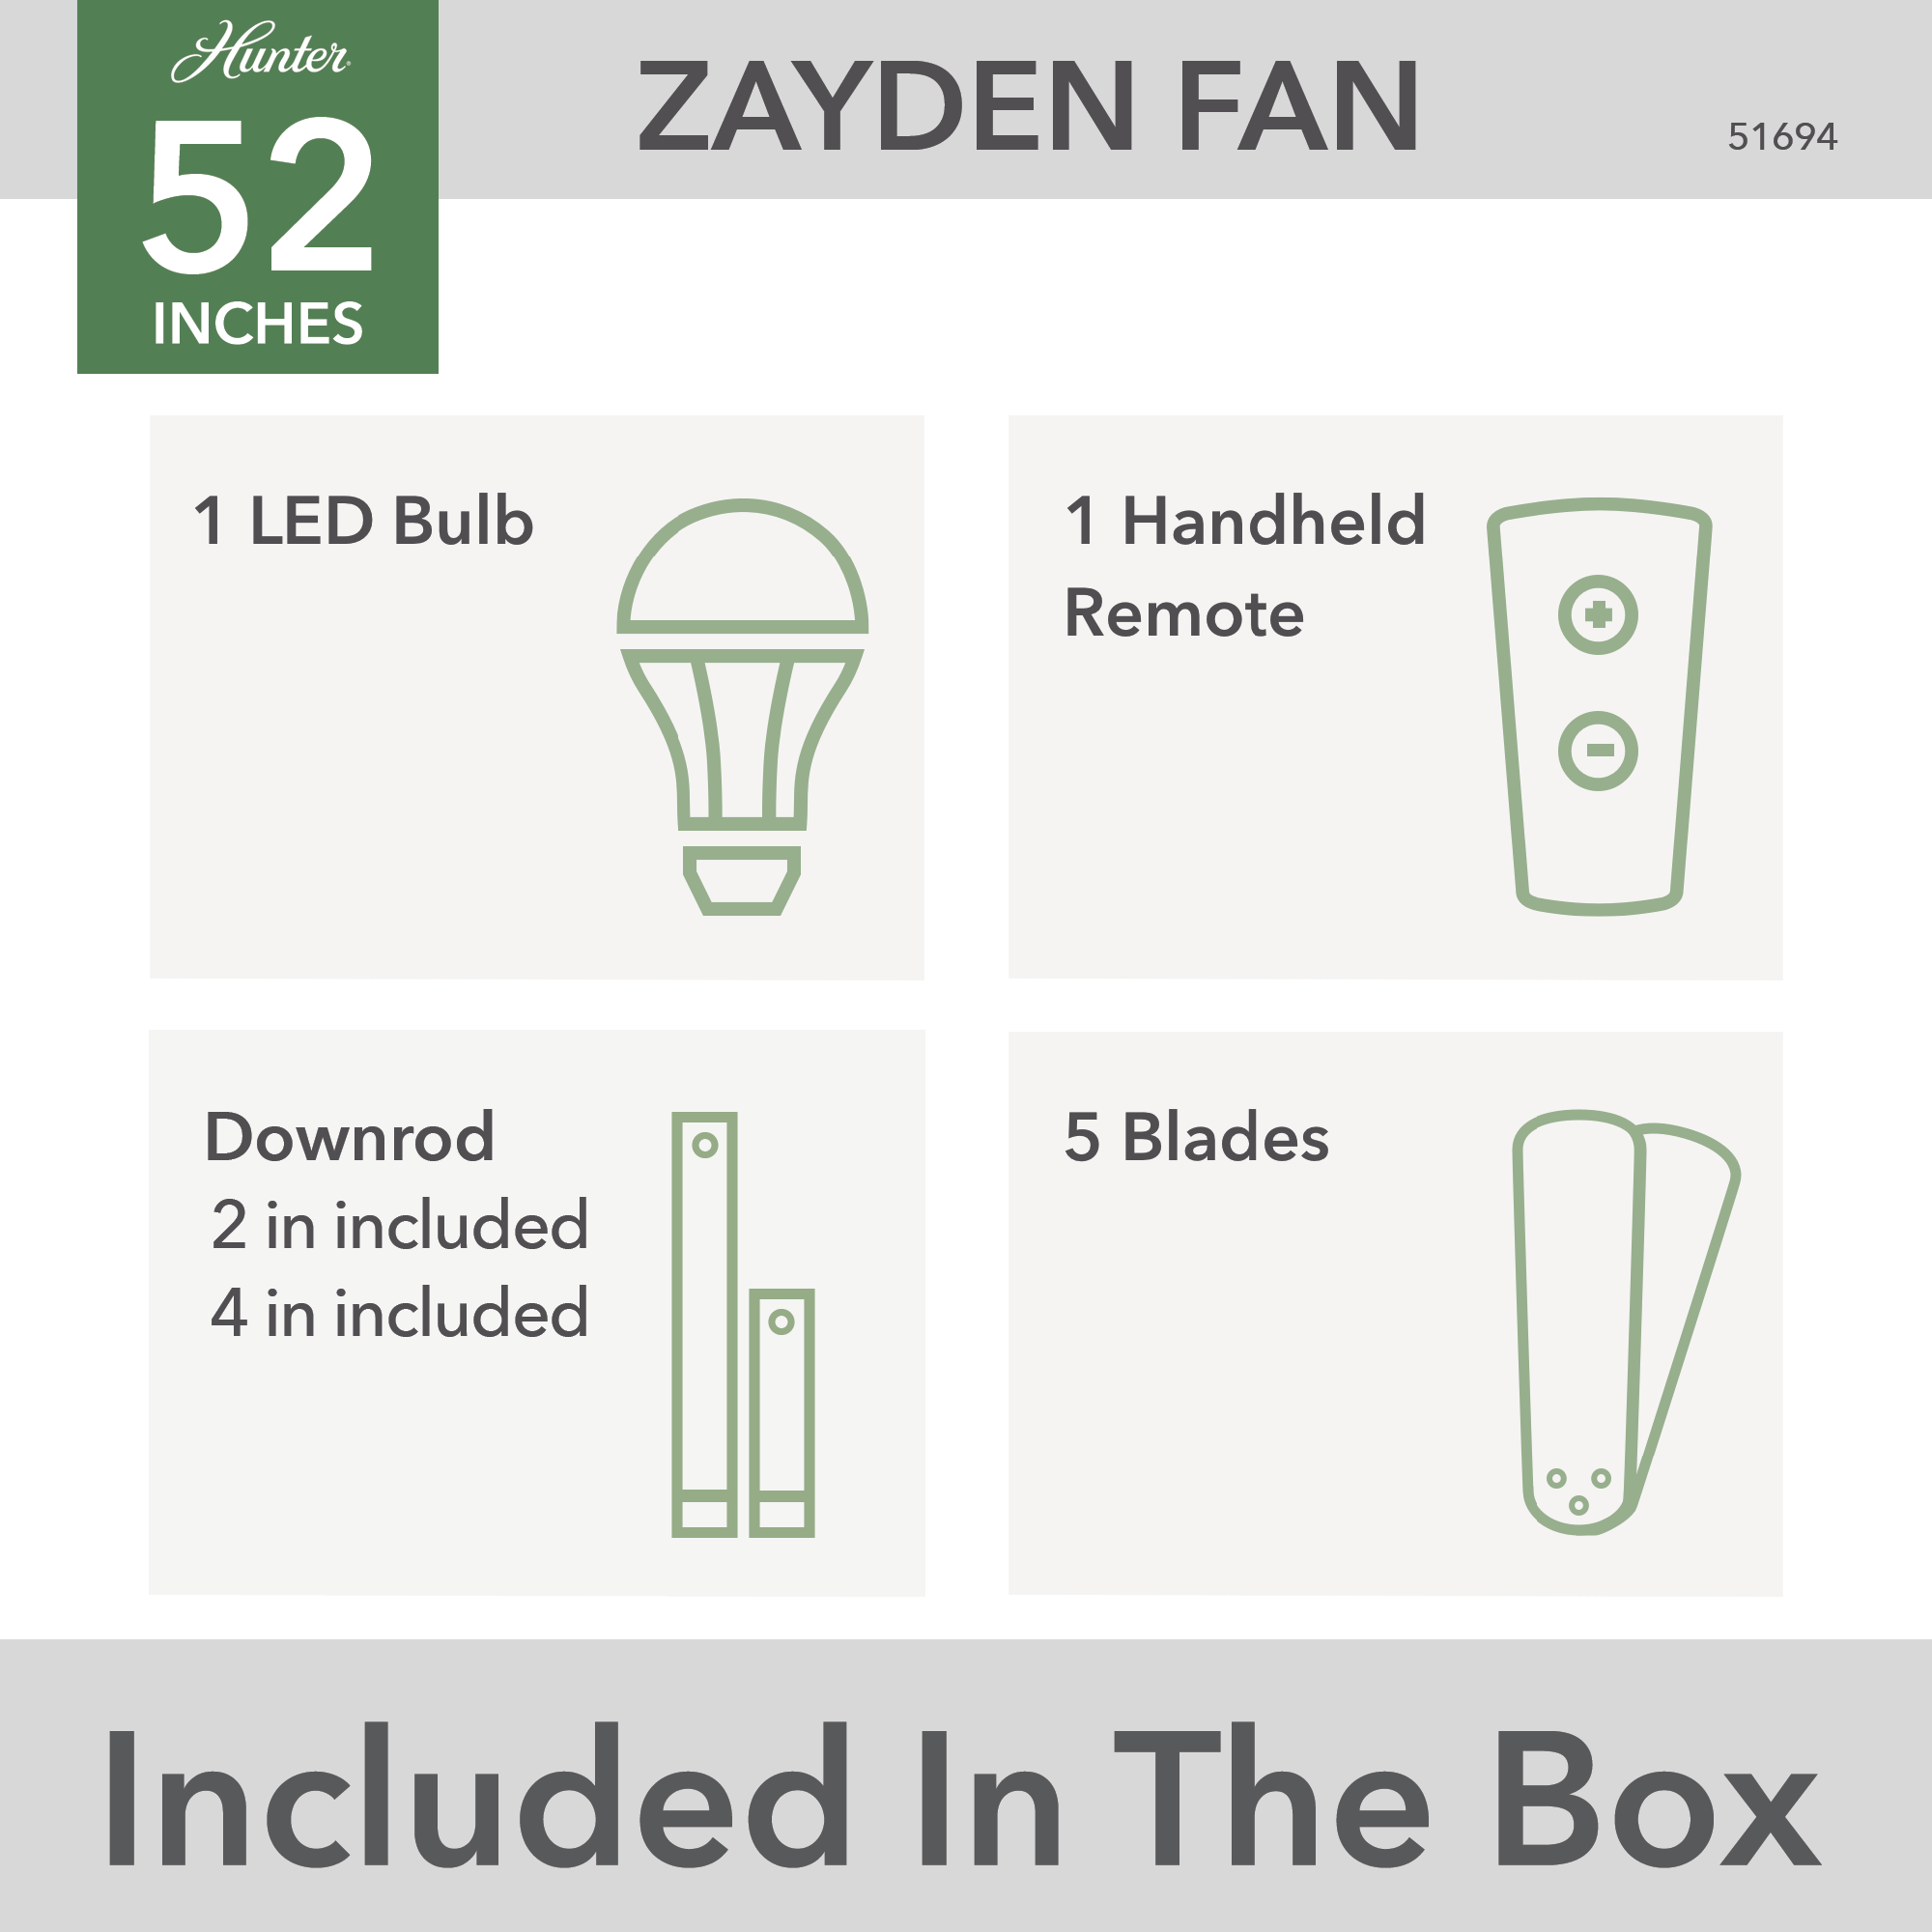 Hunter 52 inch Zayden Ceiling Fan with LED Light Kit and Handheld Remote